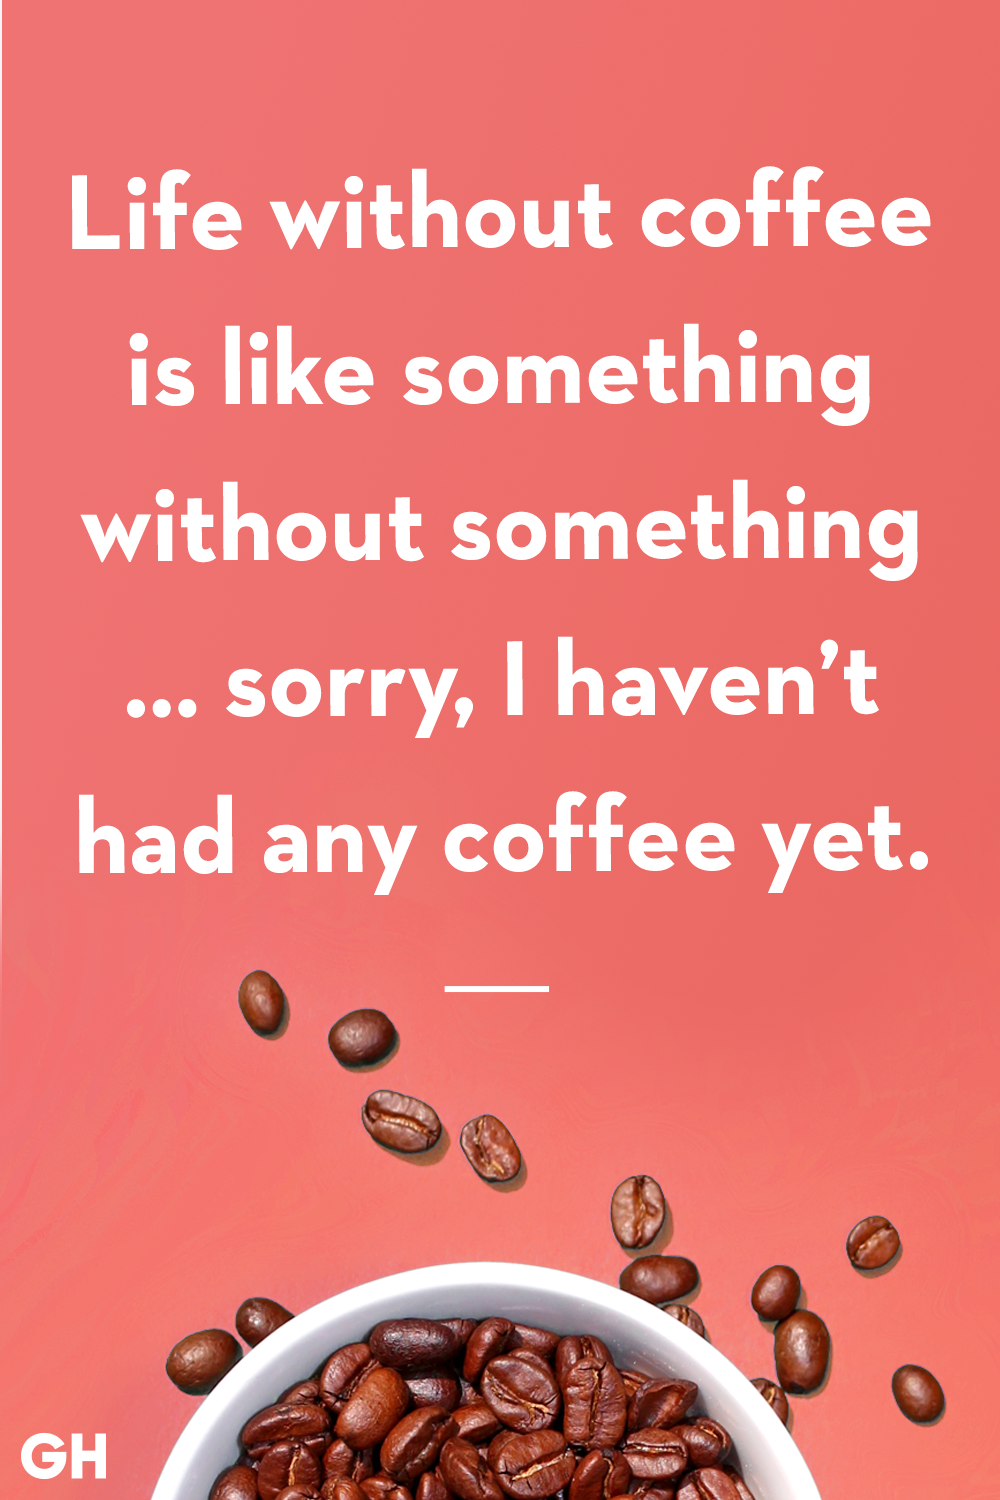 40 Funny Coffee Quotes - Best Coffee Quotes and Sayings #meWithoutCoffeeQuote